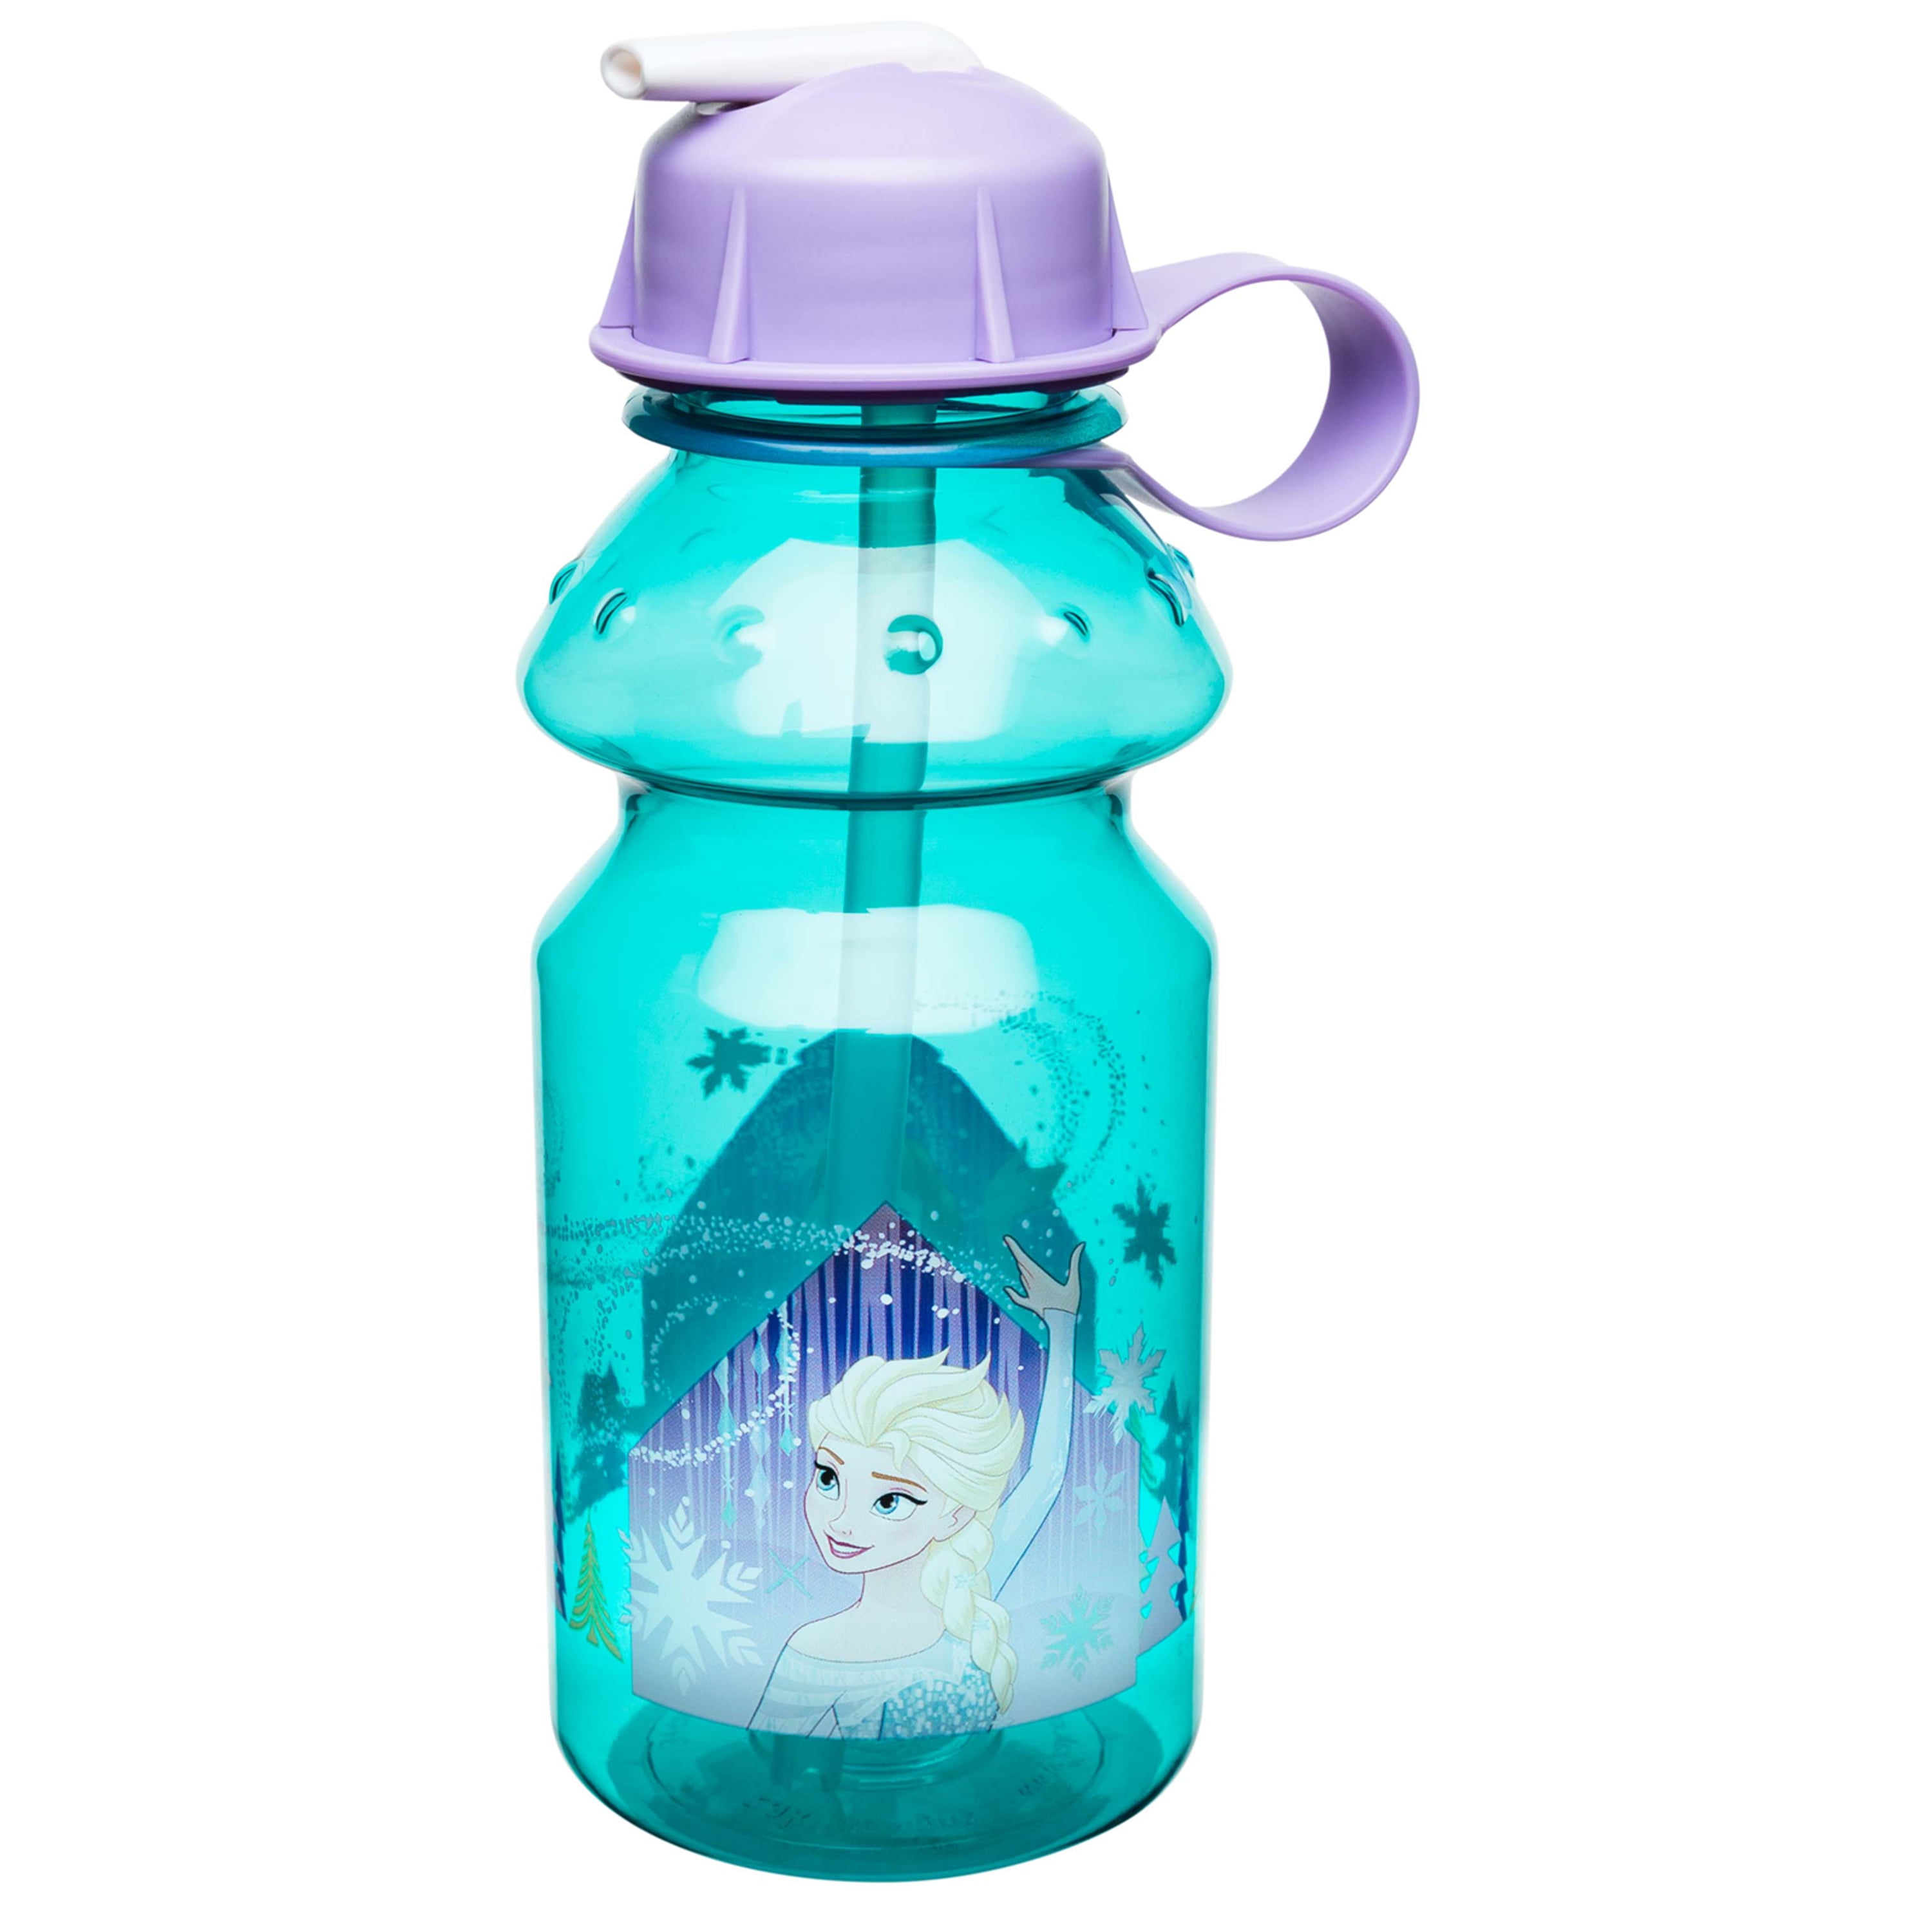 Disney Frozen Water Bottle Set for Kids - Bundle with 12 oz Frozen Canteen with Pop Up Lid and Strap Plus Frozen Stickers and More (Girls Water